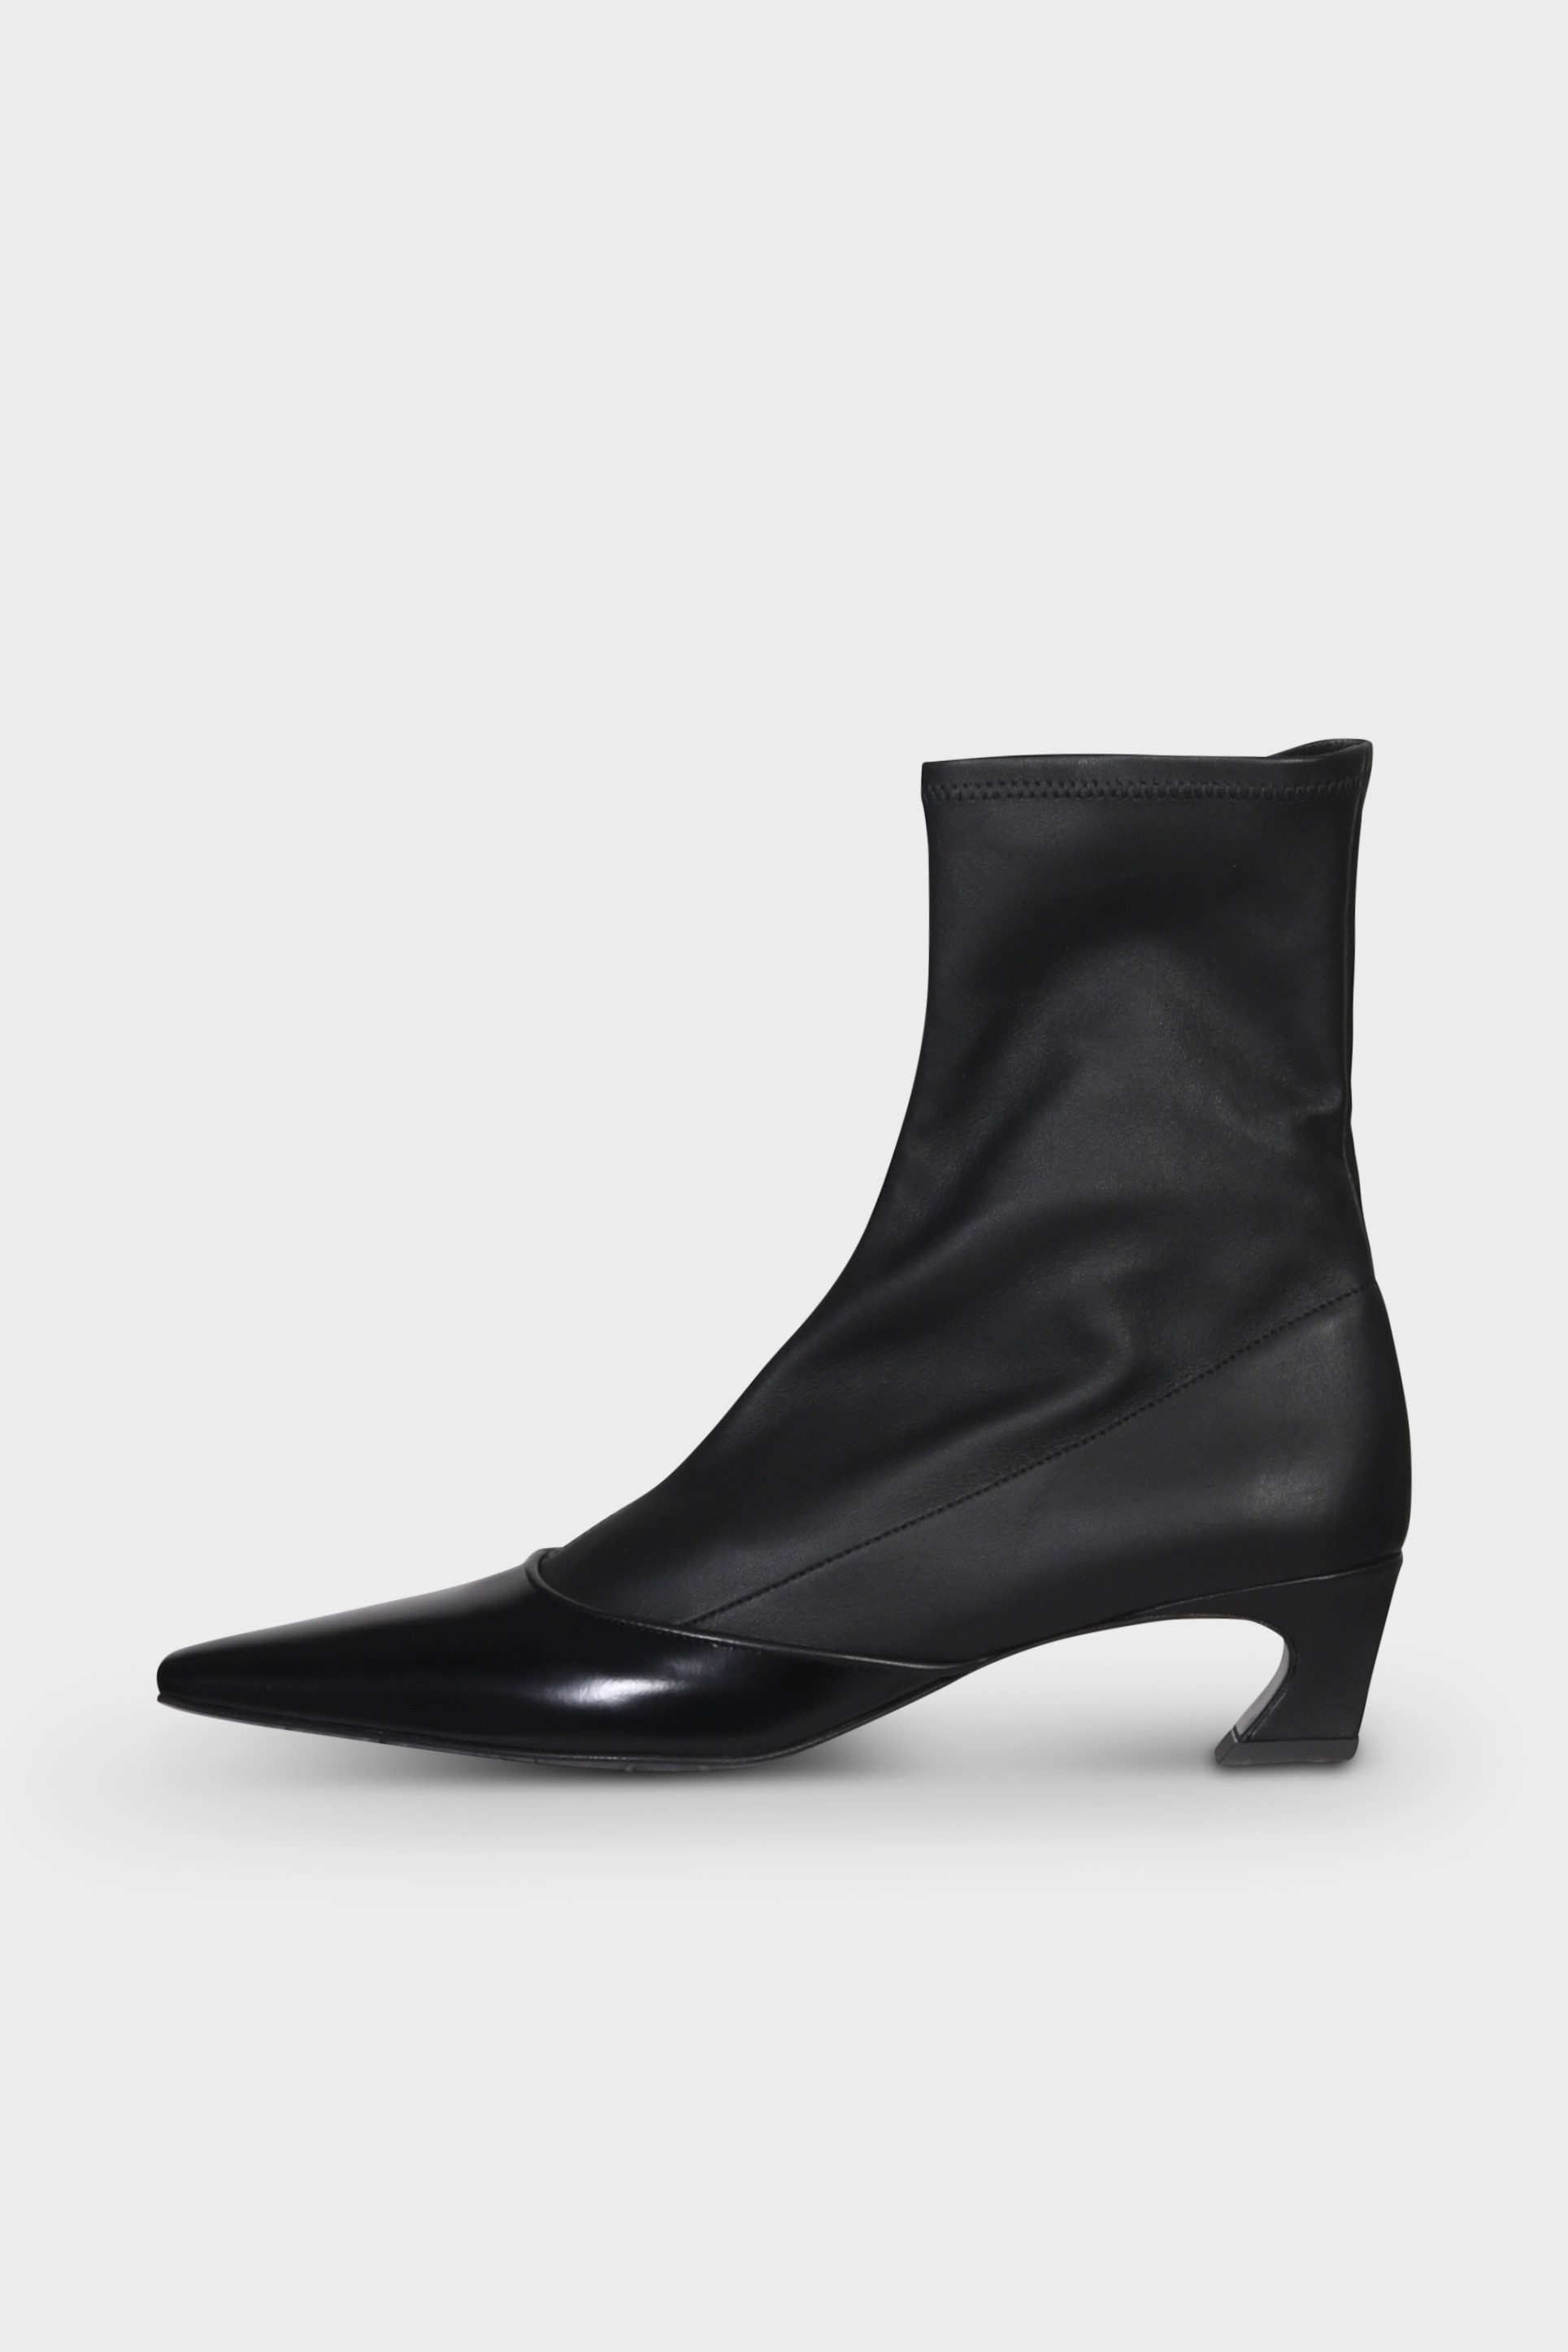 ACNE STUDIOS Ankle Boots in Black 37